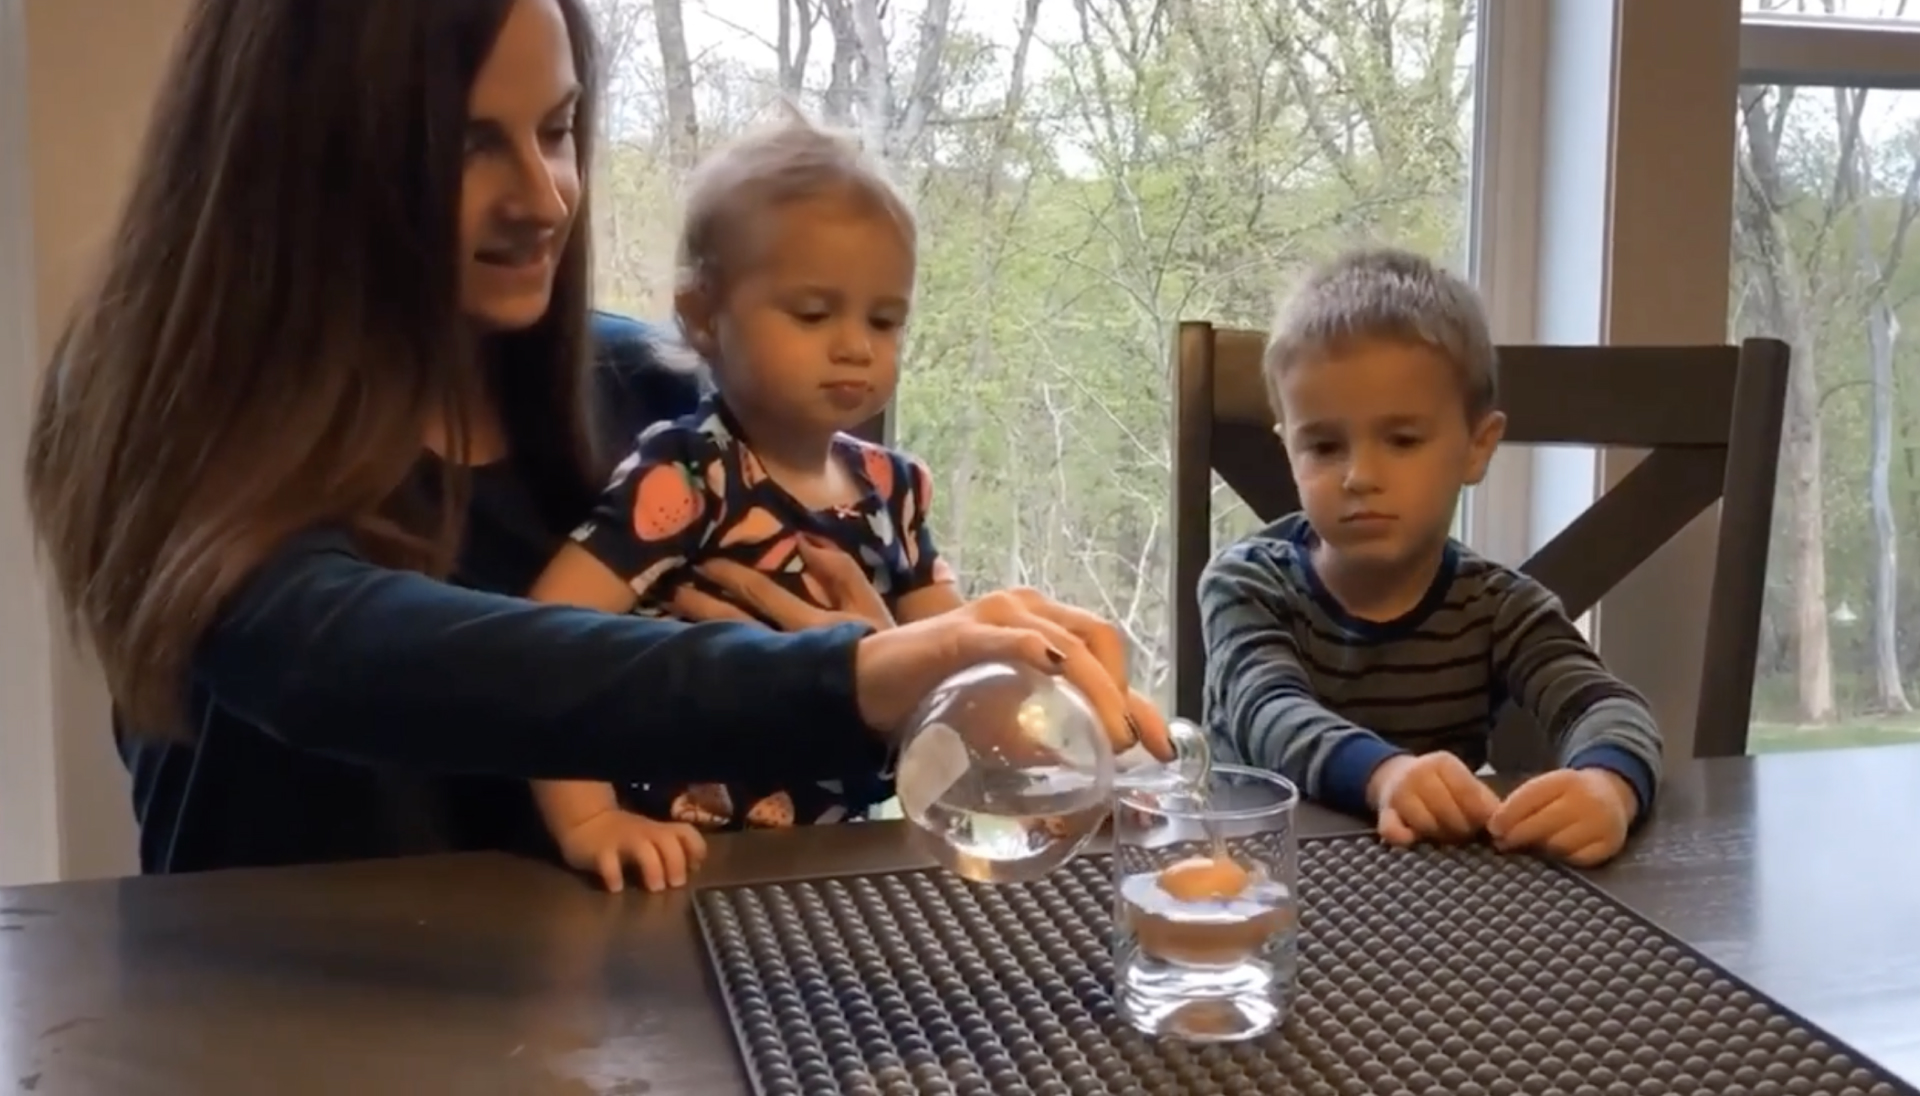 An engineer from the Flint Hills Resources Pine Bend refinery conducts a video experiment using an egg and vinegar to demonstrate a chemical reaction, part of a STEM at Home series on Facebook.